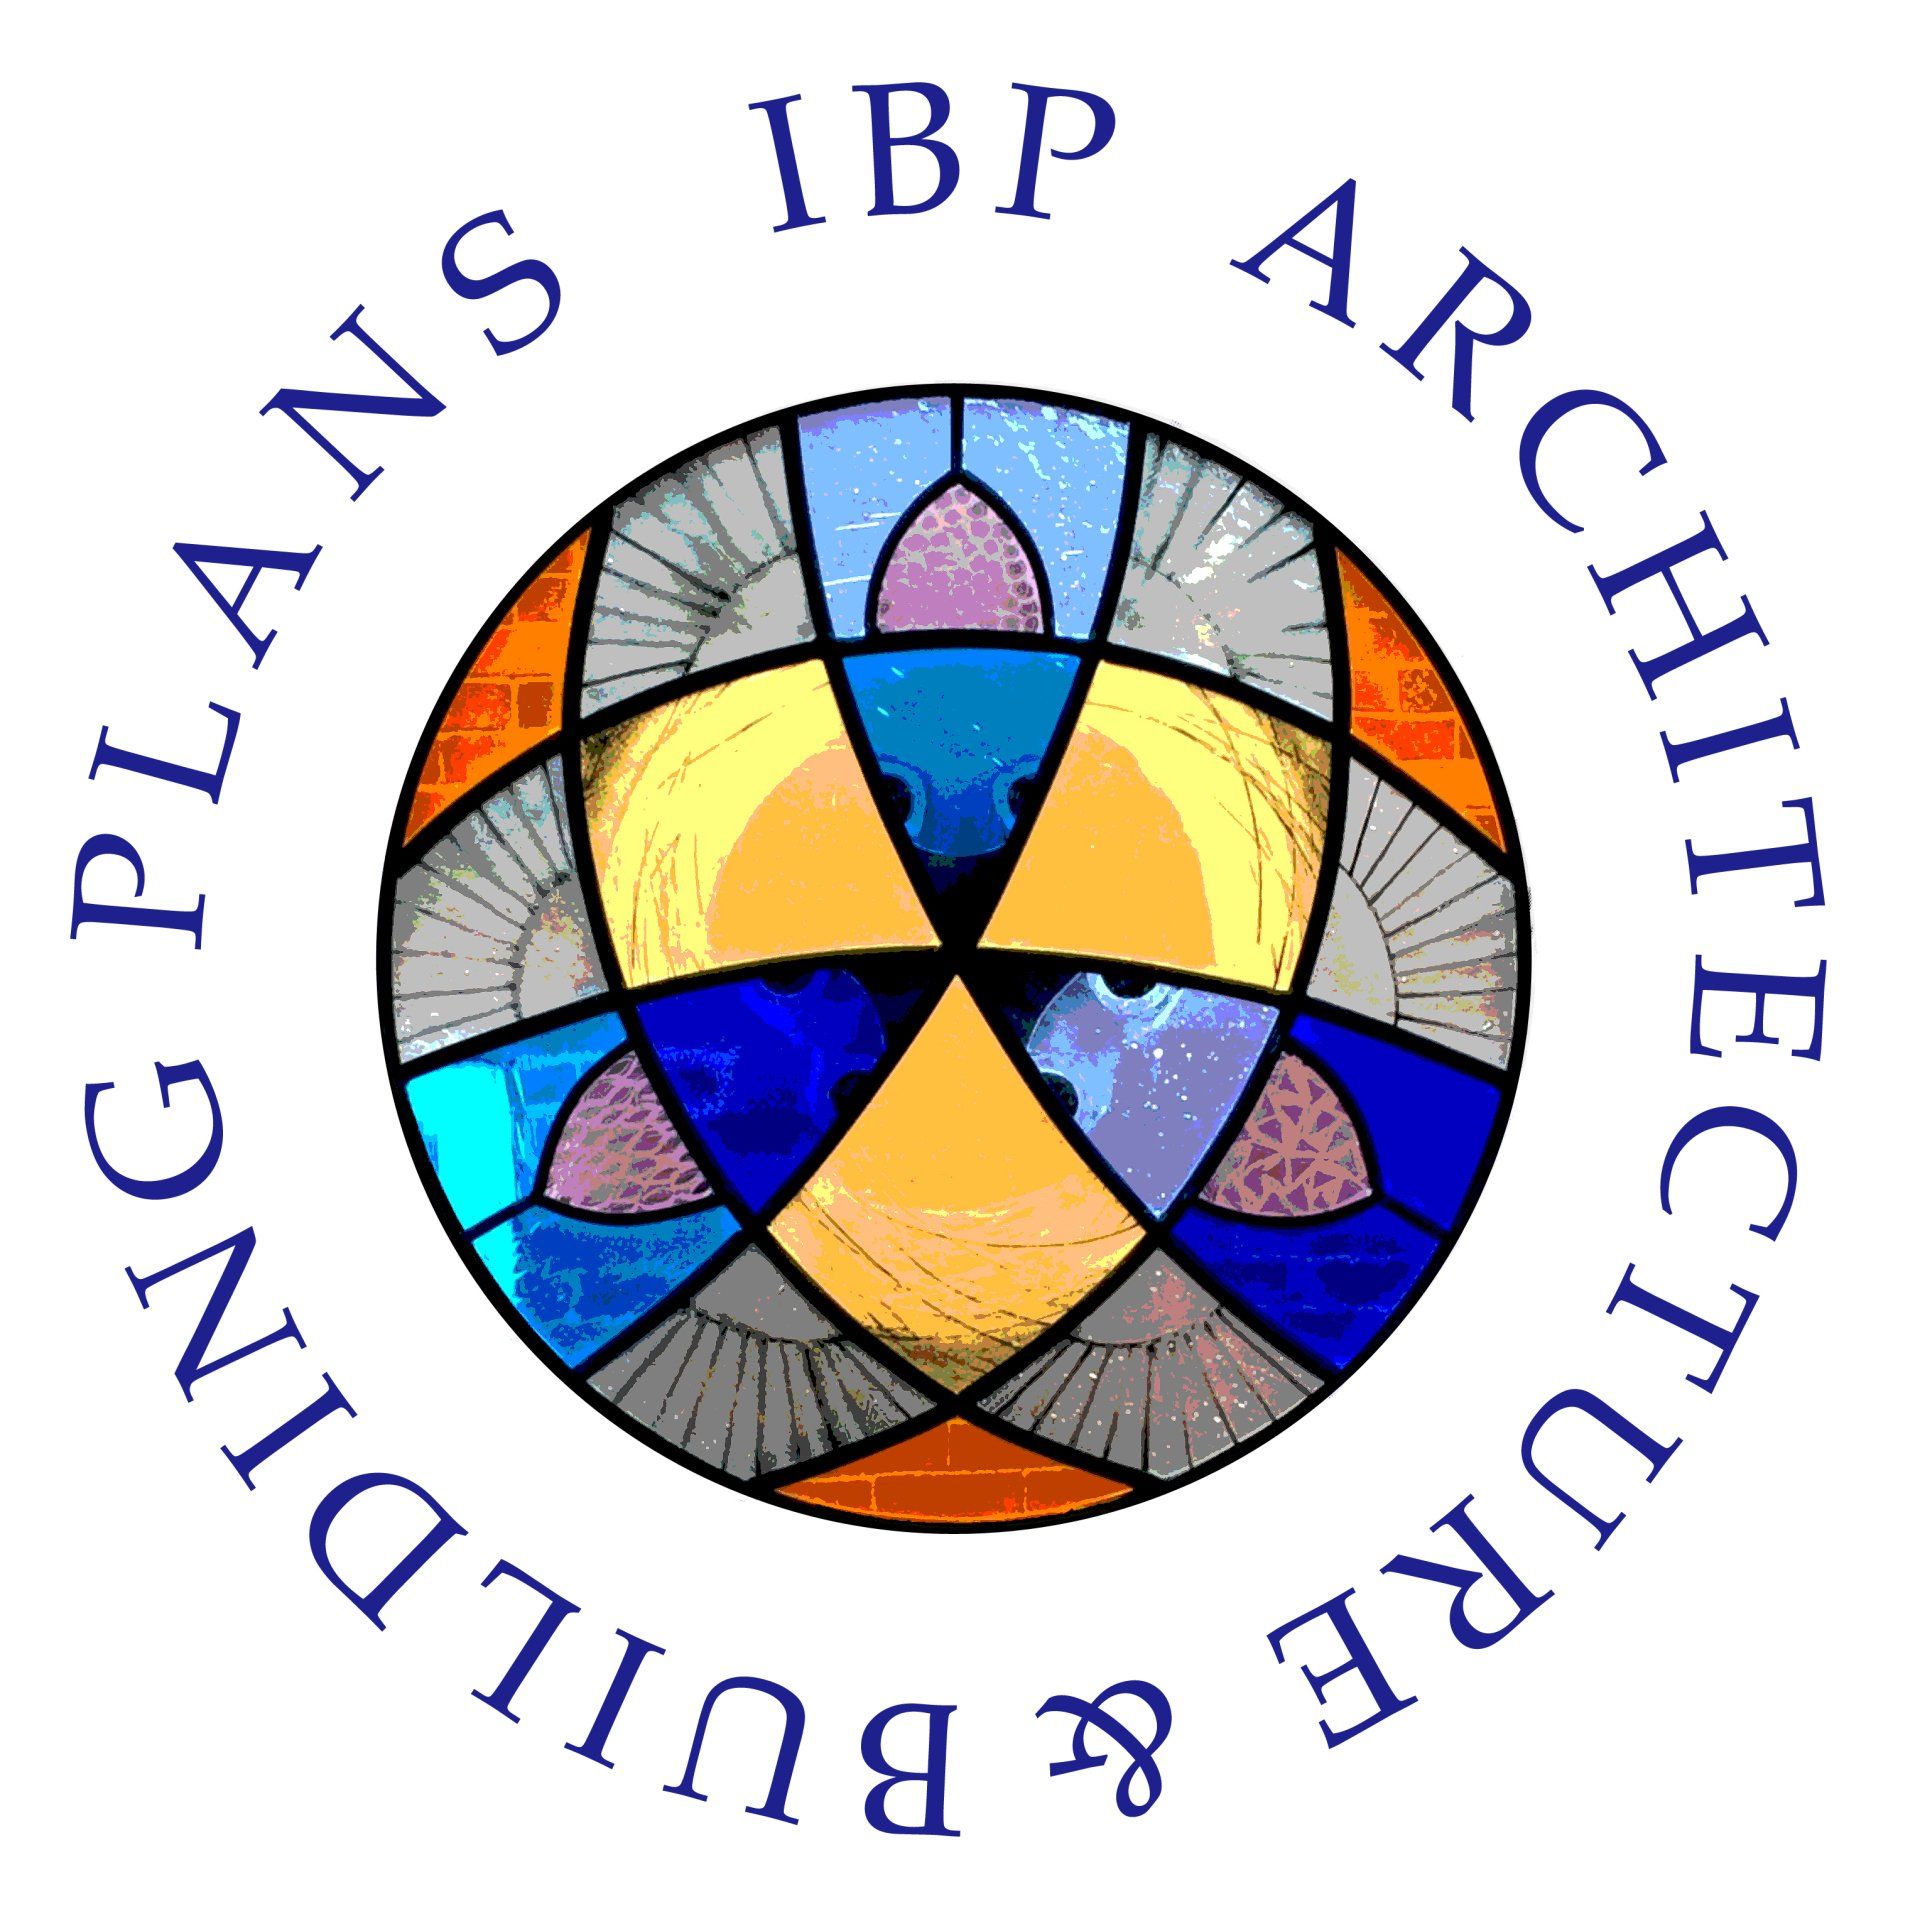 Ian Riches MCIAT IBP Architecture and Building Plans logo